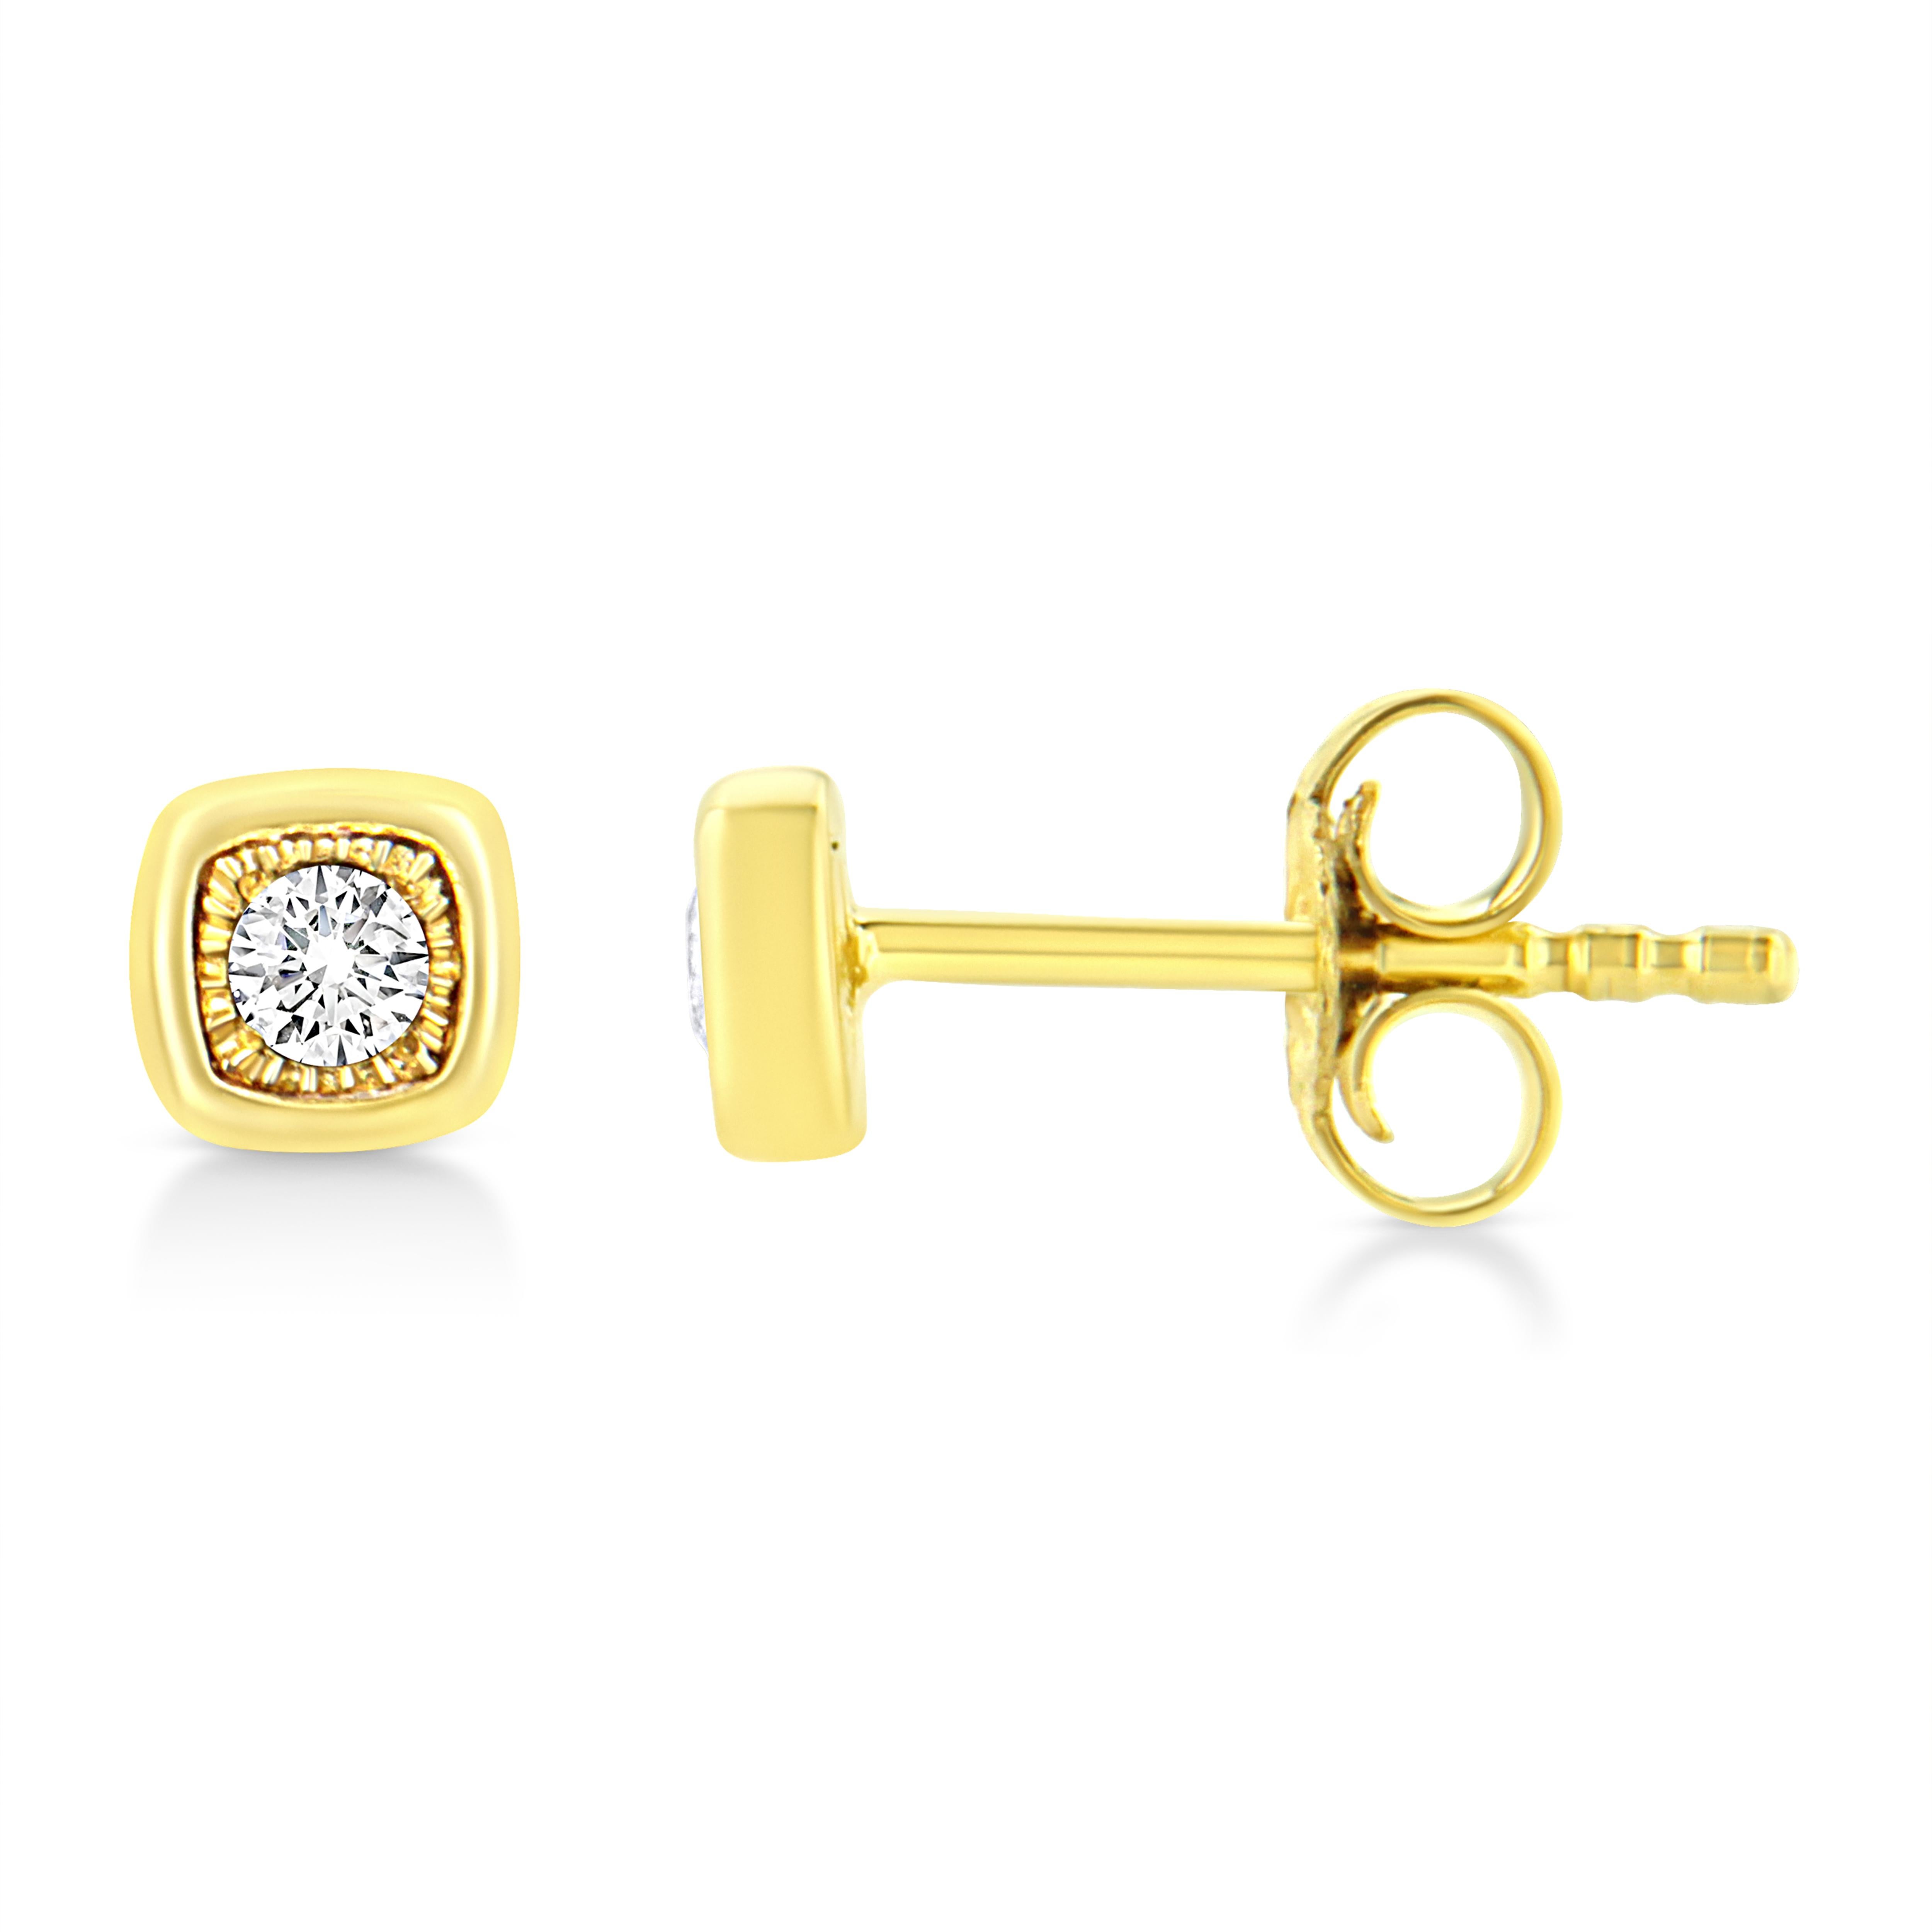 These cushion shaped stud earrings are crafted in 10k yellow gold plated sterling silver and feature 1/10ct TDW of diamonds. Each earring features a single sparkling round cut diamond in a miracle setting that adds to the earrings sparkle. A